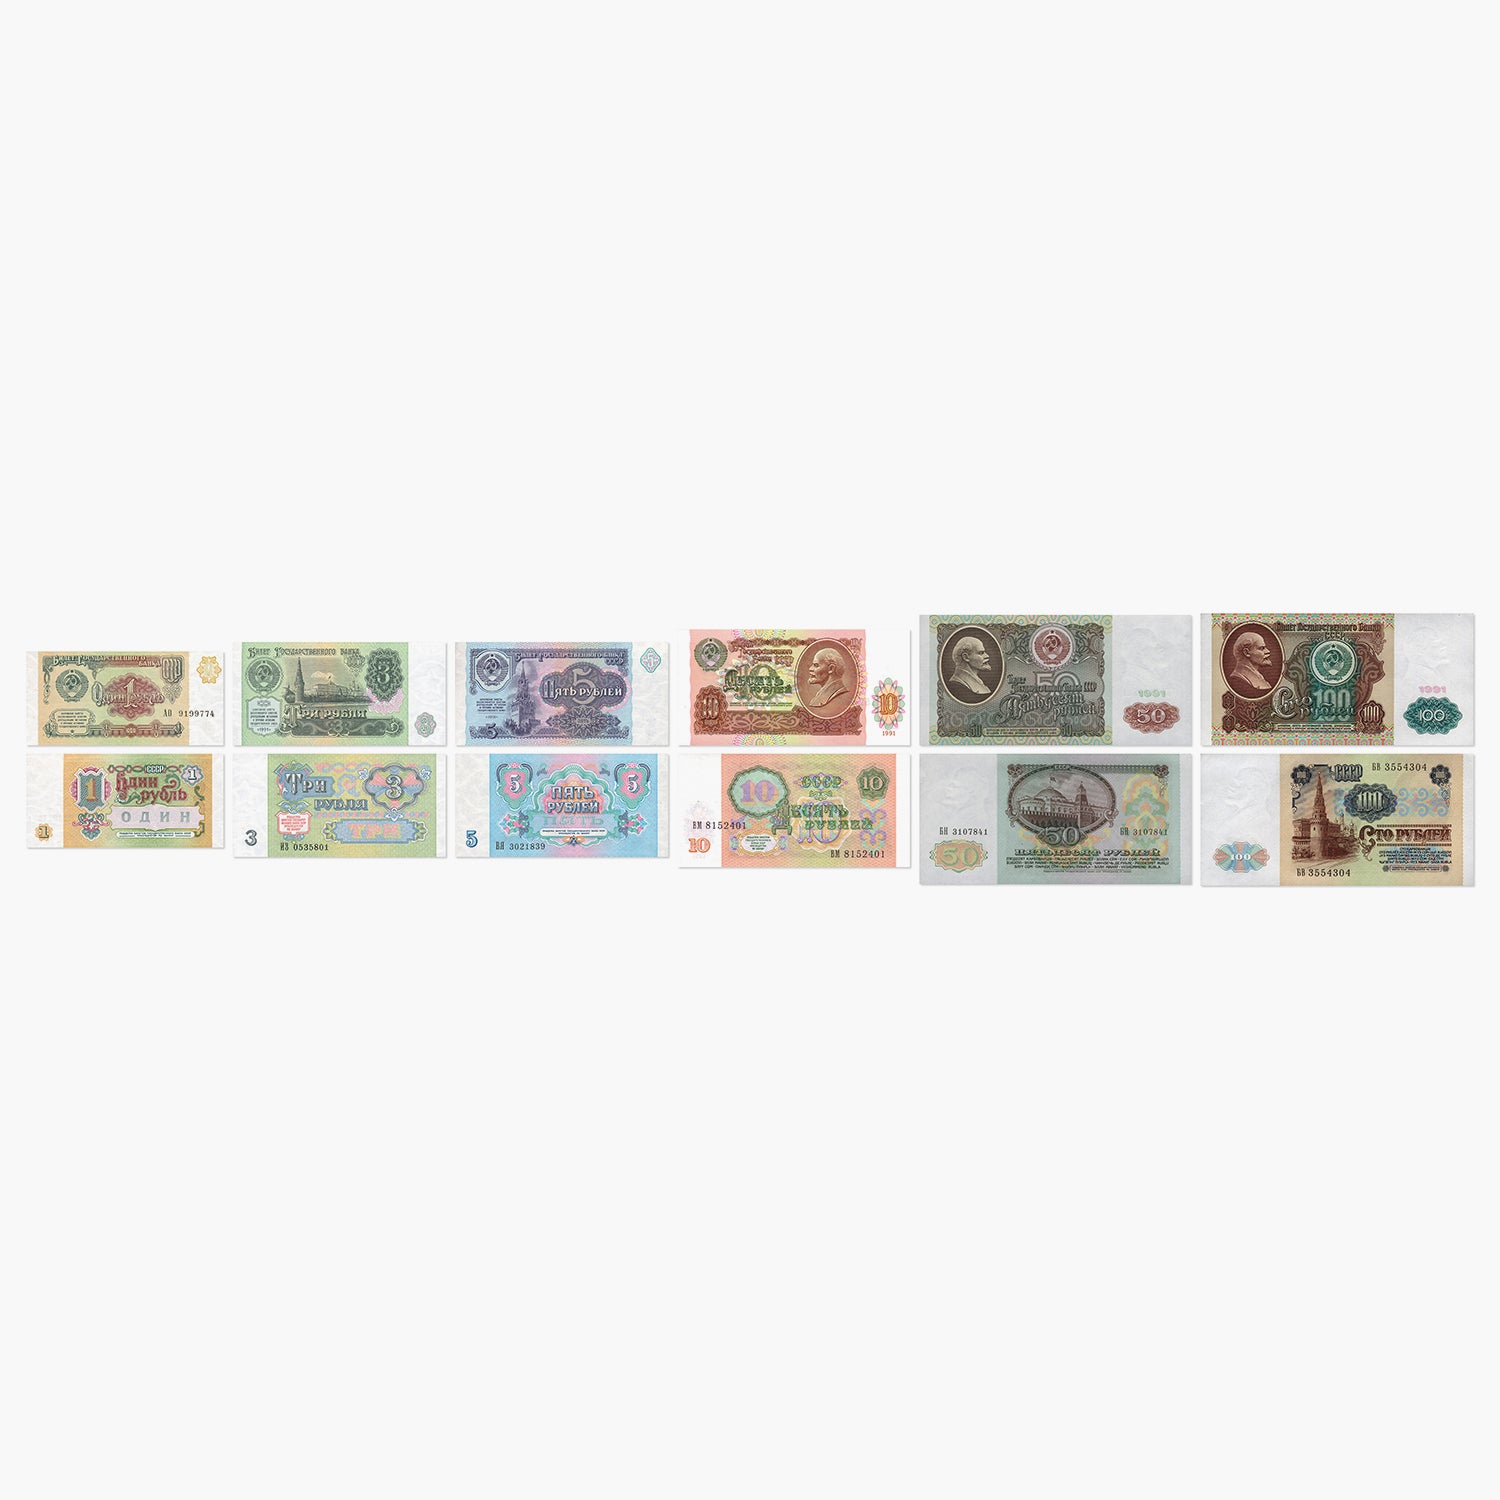 The last Banknote Issues from the USSR